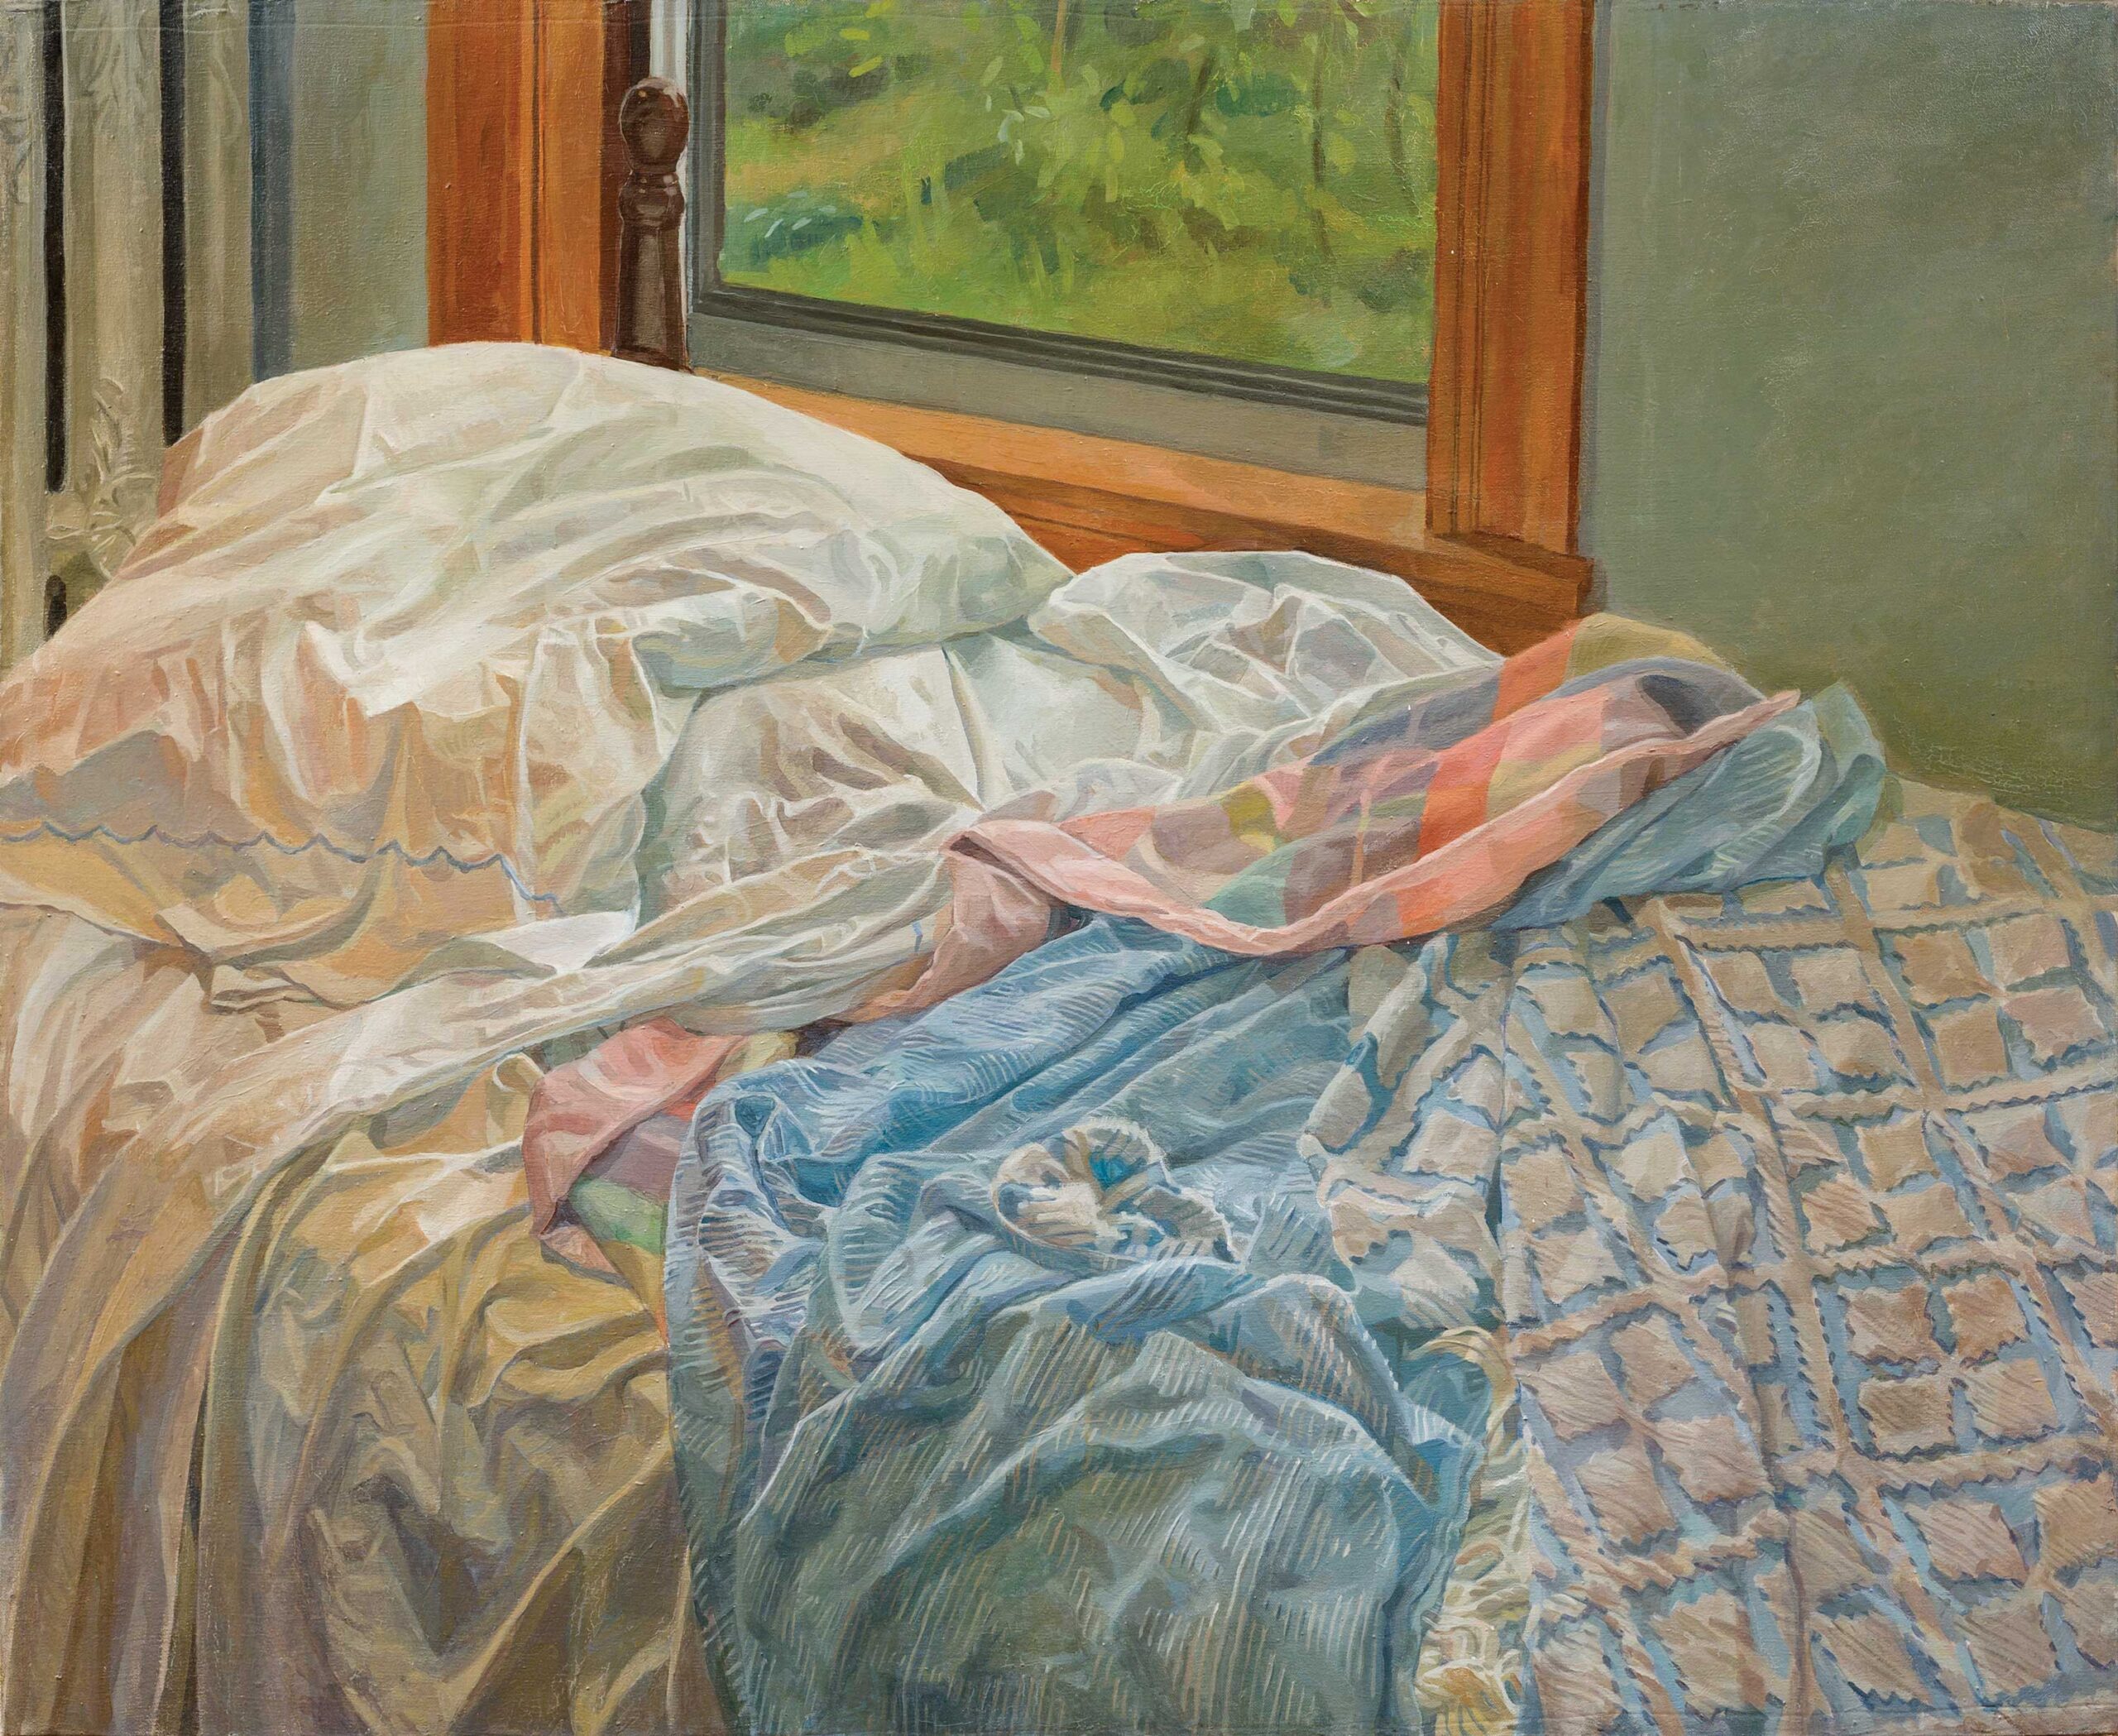 Catherine Murphy, “Unmade Bed,” 1969, oil on canvas, 44 x 36 in., private collection